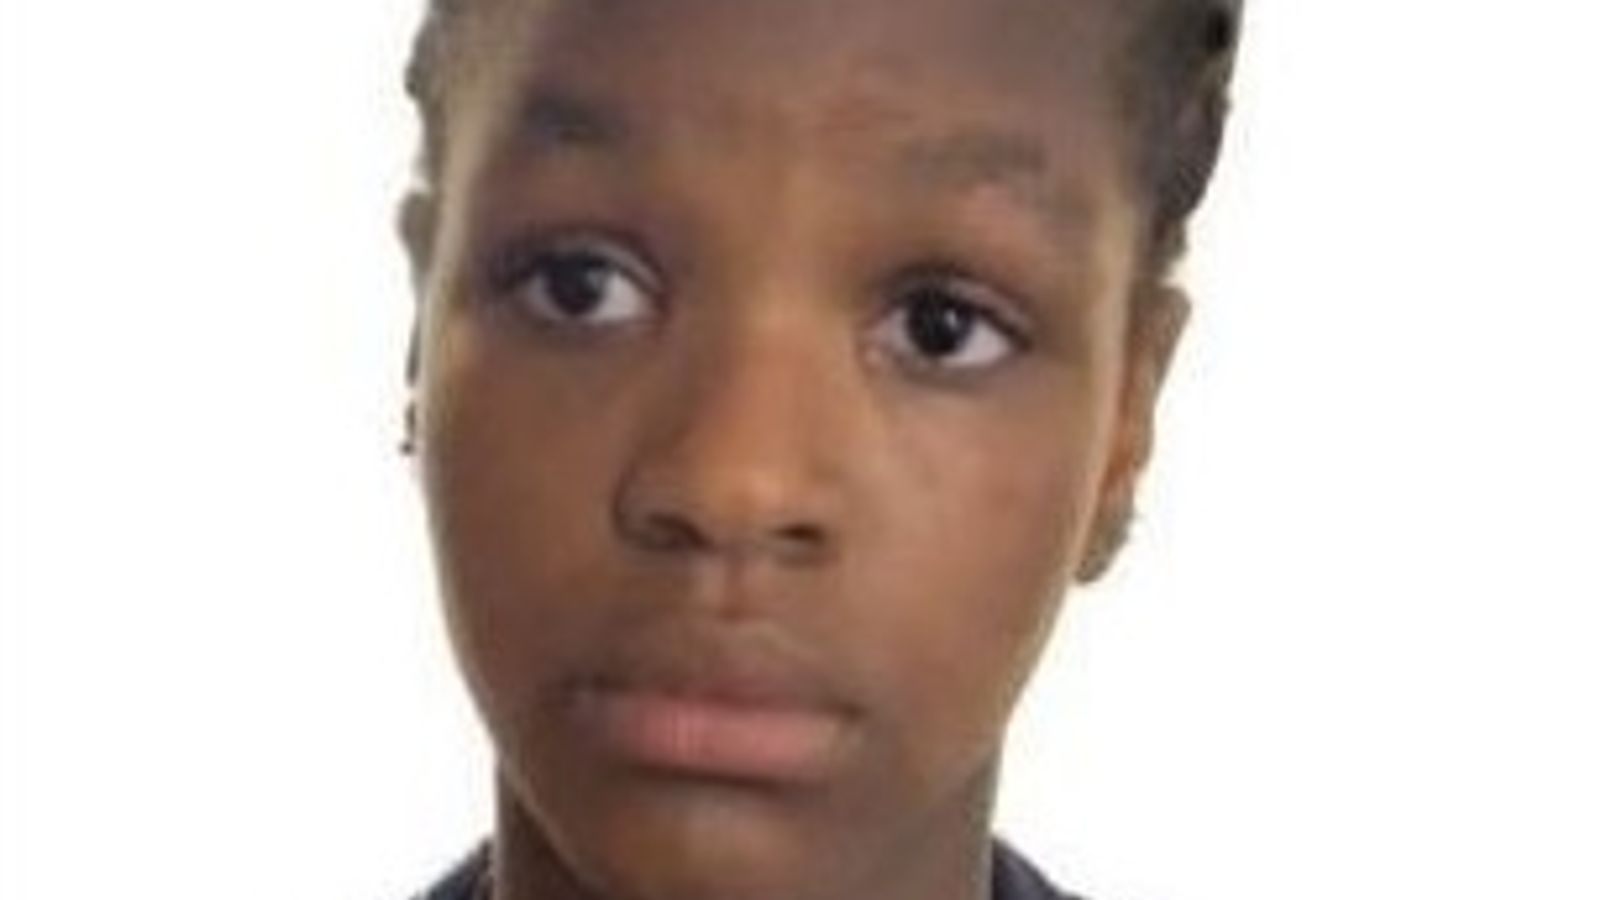 Mariama Kallon: Police launch appeal to find 13-year-old girl missing from home in London